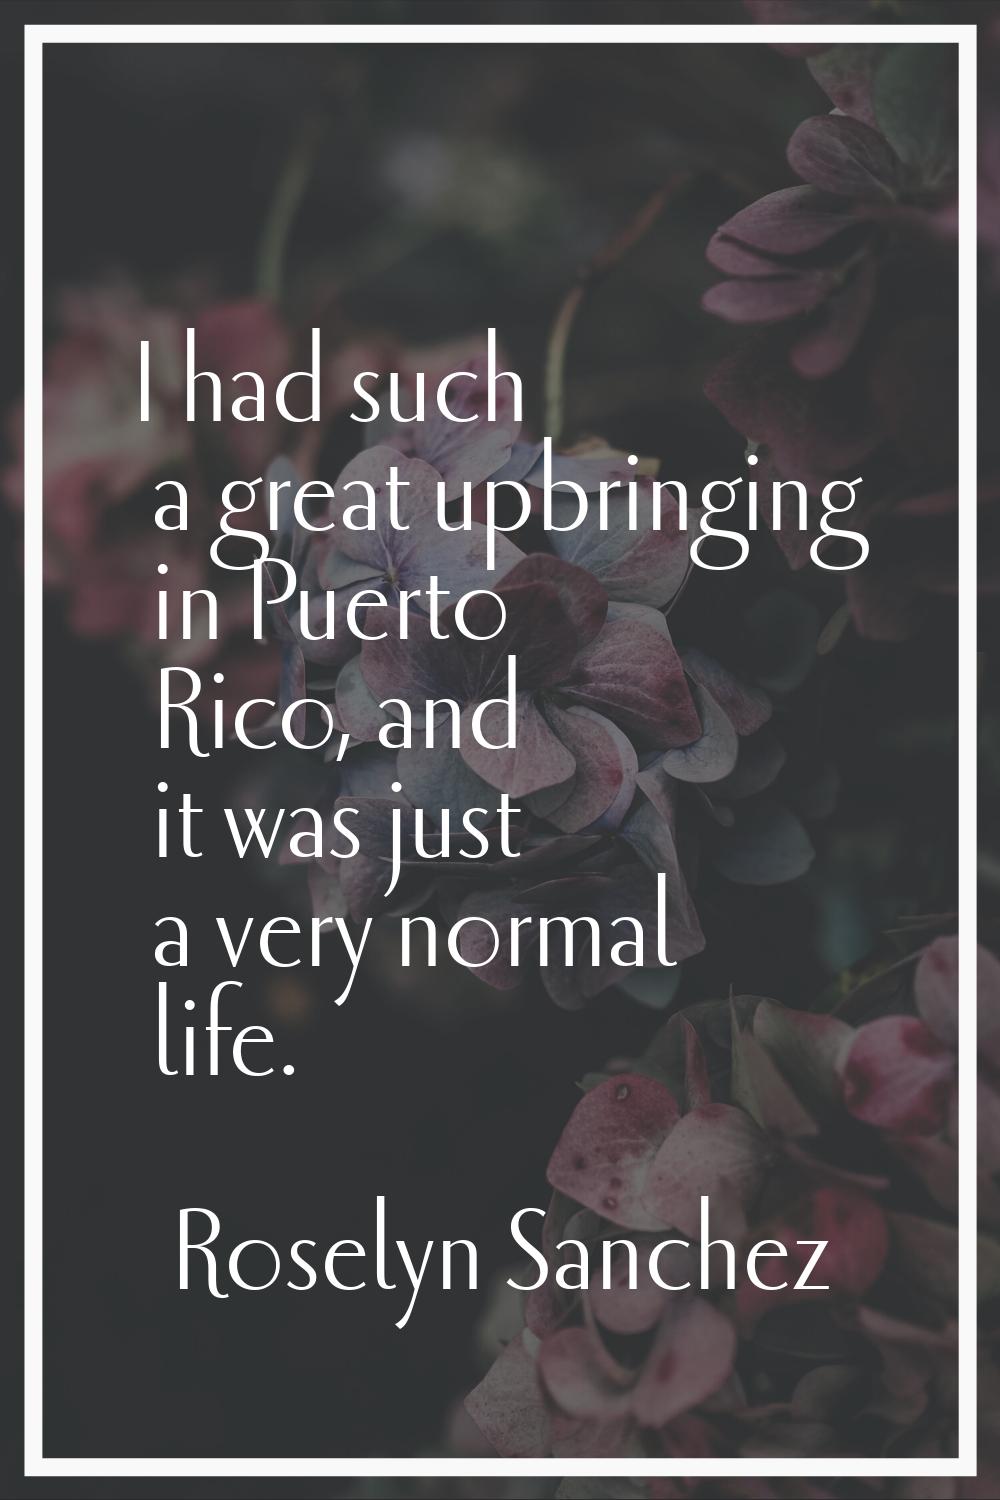 I had such a great upbringing in Puerto Rico, and it was just a very normal life.